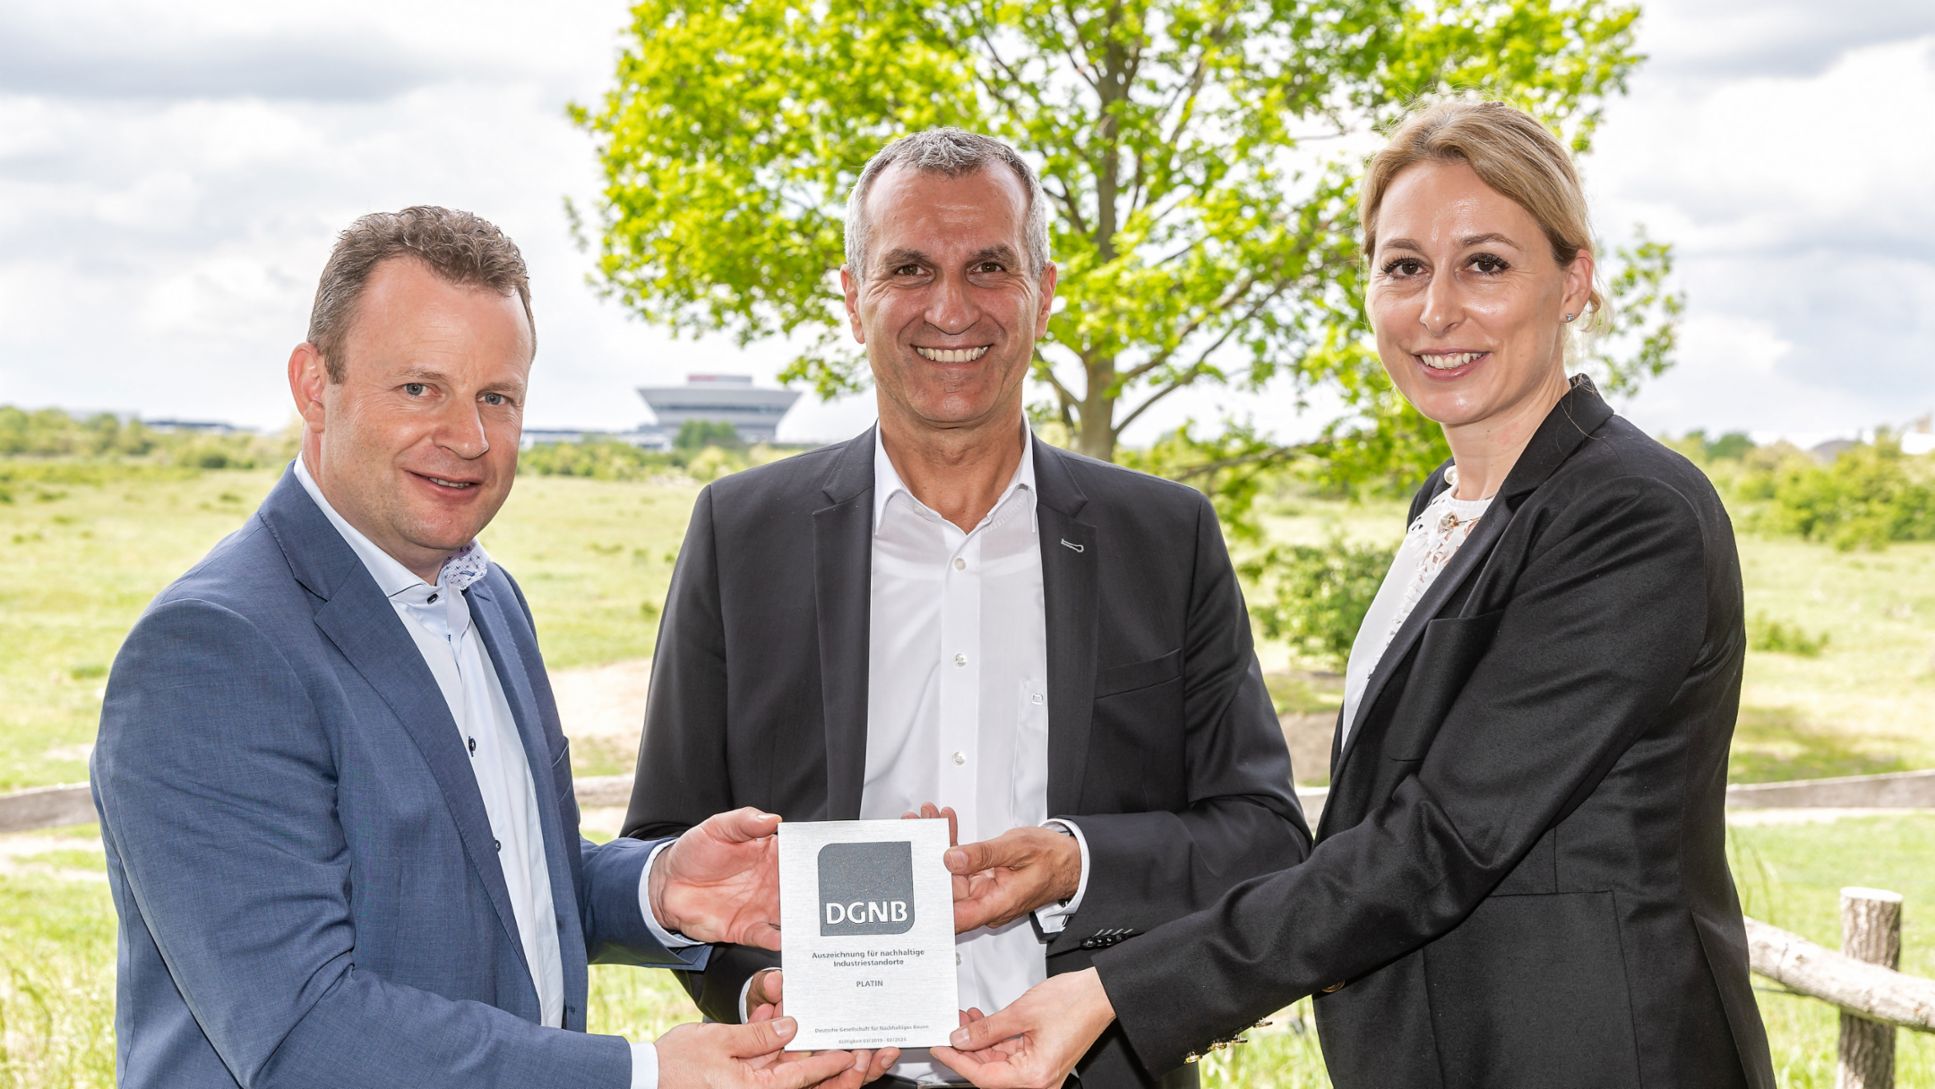 Gerd Rupp, Chairman of the Executive Board at Porsche Leipzig GmbH, Albrecht Reimold, Member of the Executive Board for Production and Logistics at Porsche AG, Dr. Christine Lemaitre, Chief Executive Officer at DGNB, l-r, 2019, Porsche AG